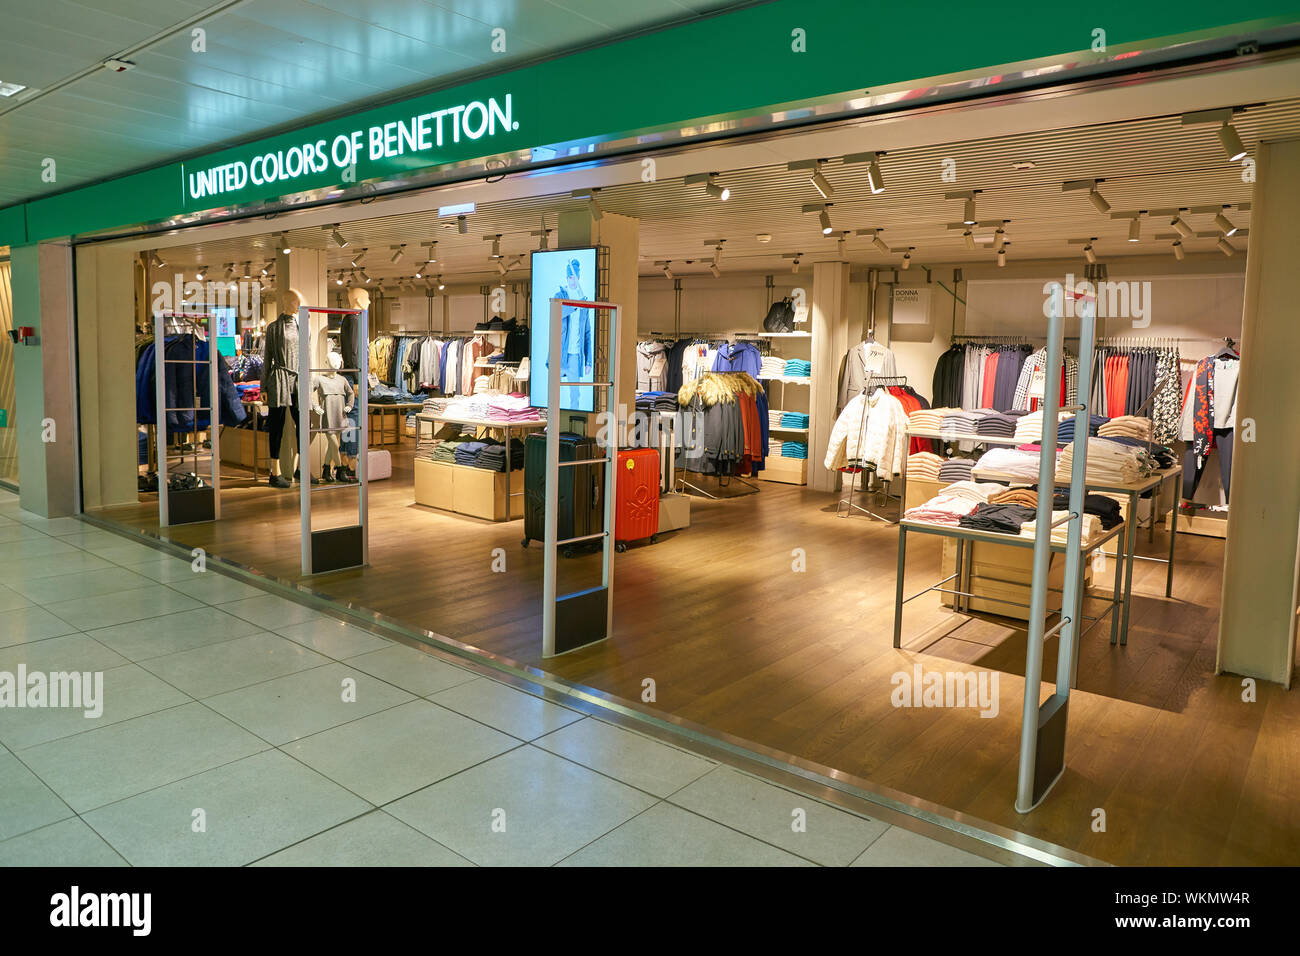 United Colors Of Benetton Shop High Resolution Stock Photography and Images  - Alamy